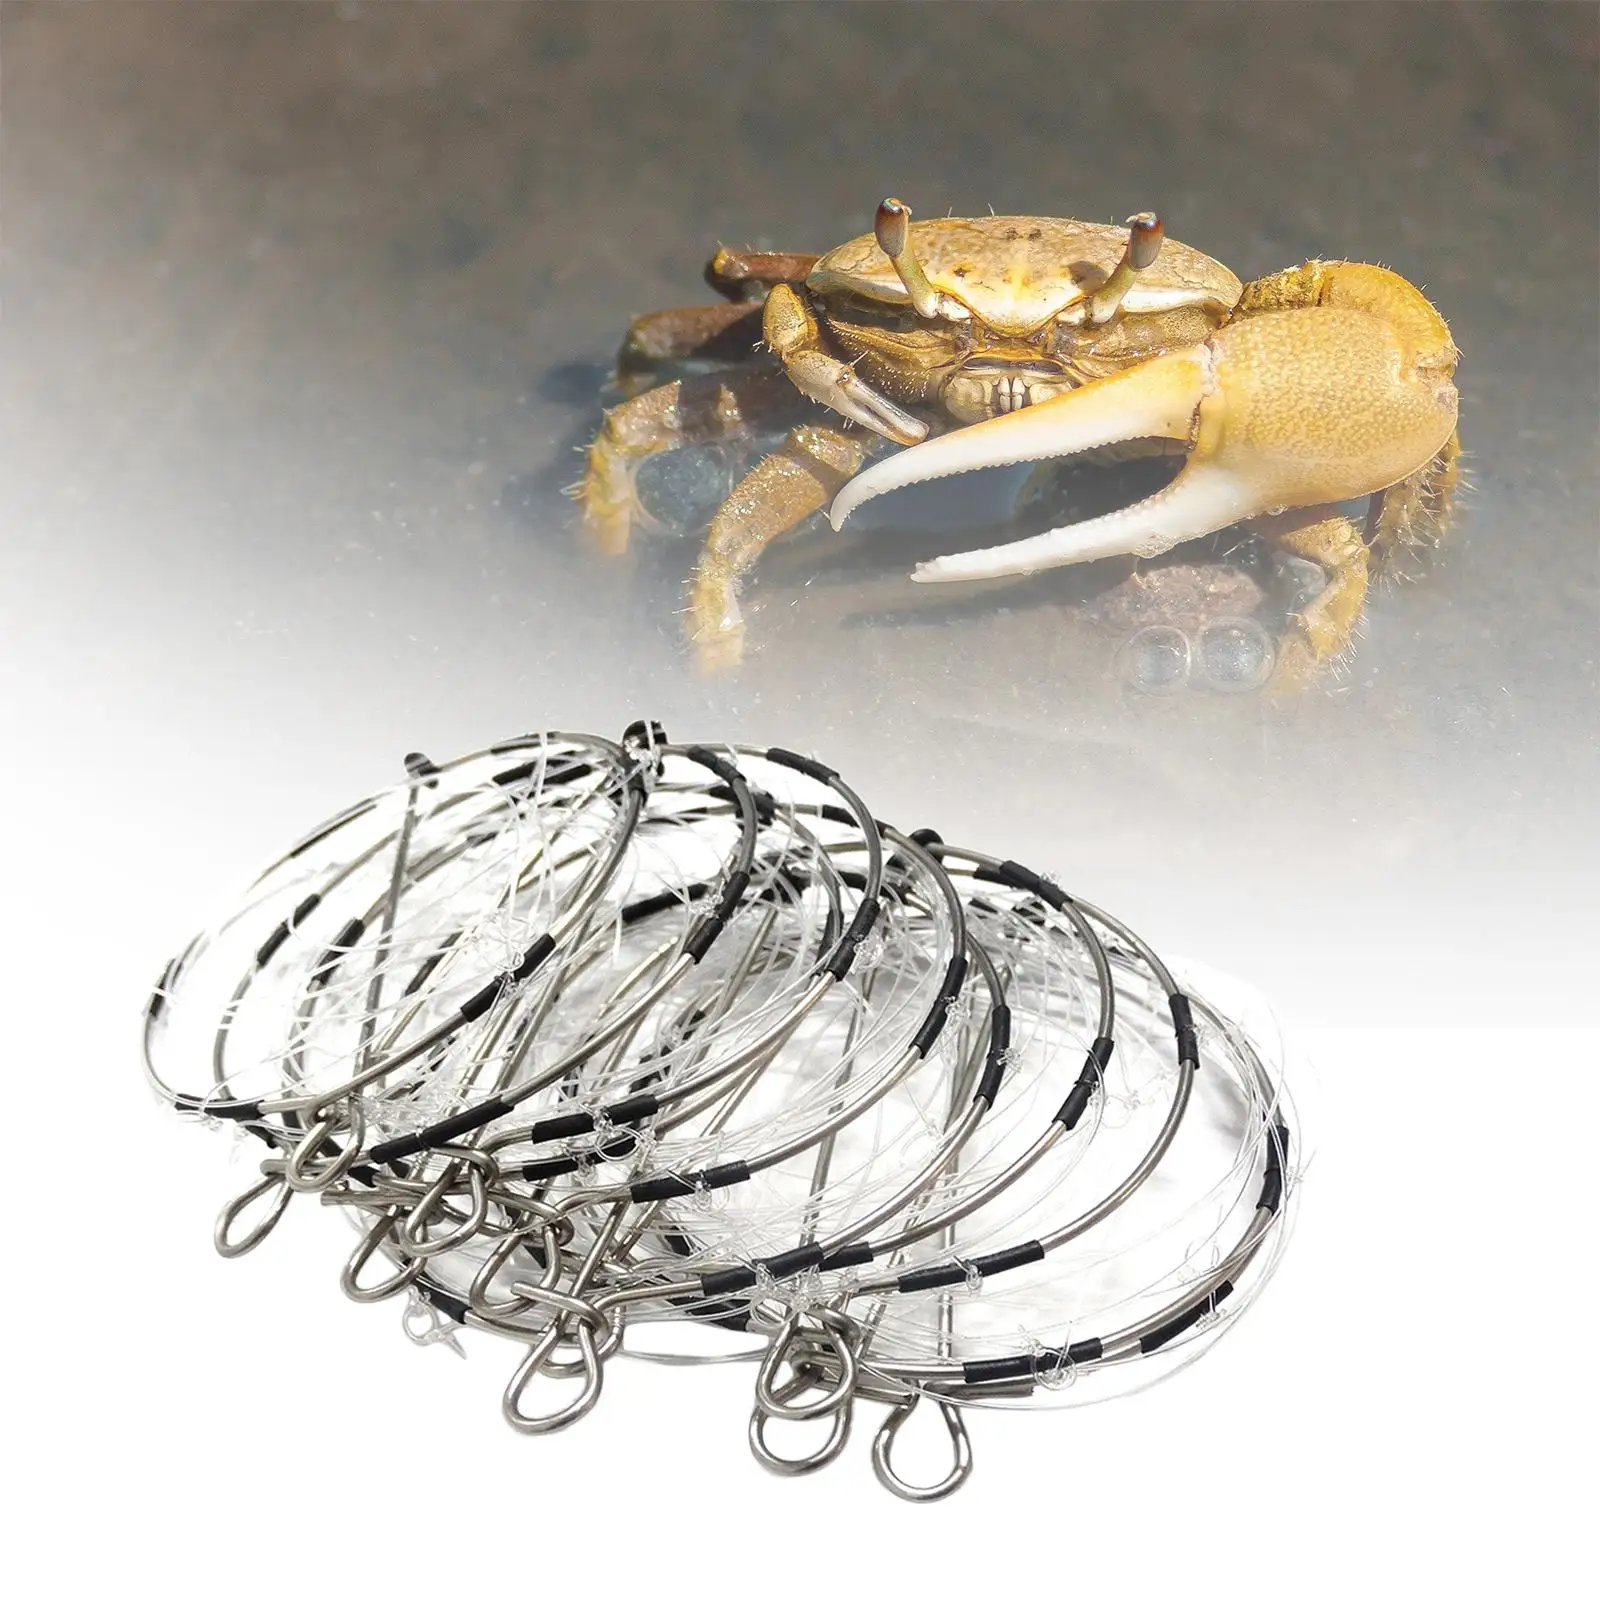 10 Pieces Crab Cast Trap Collapsible Cast Dip Cage Six Movable Buckles Catch Crabs Tool for Crab Crawfish Crayfish Prawn Rivers